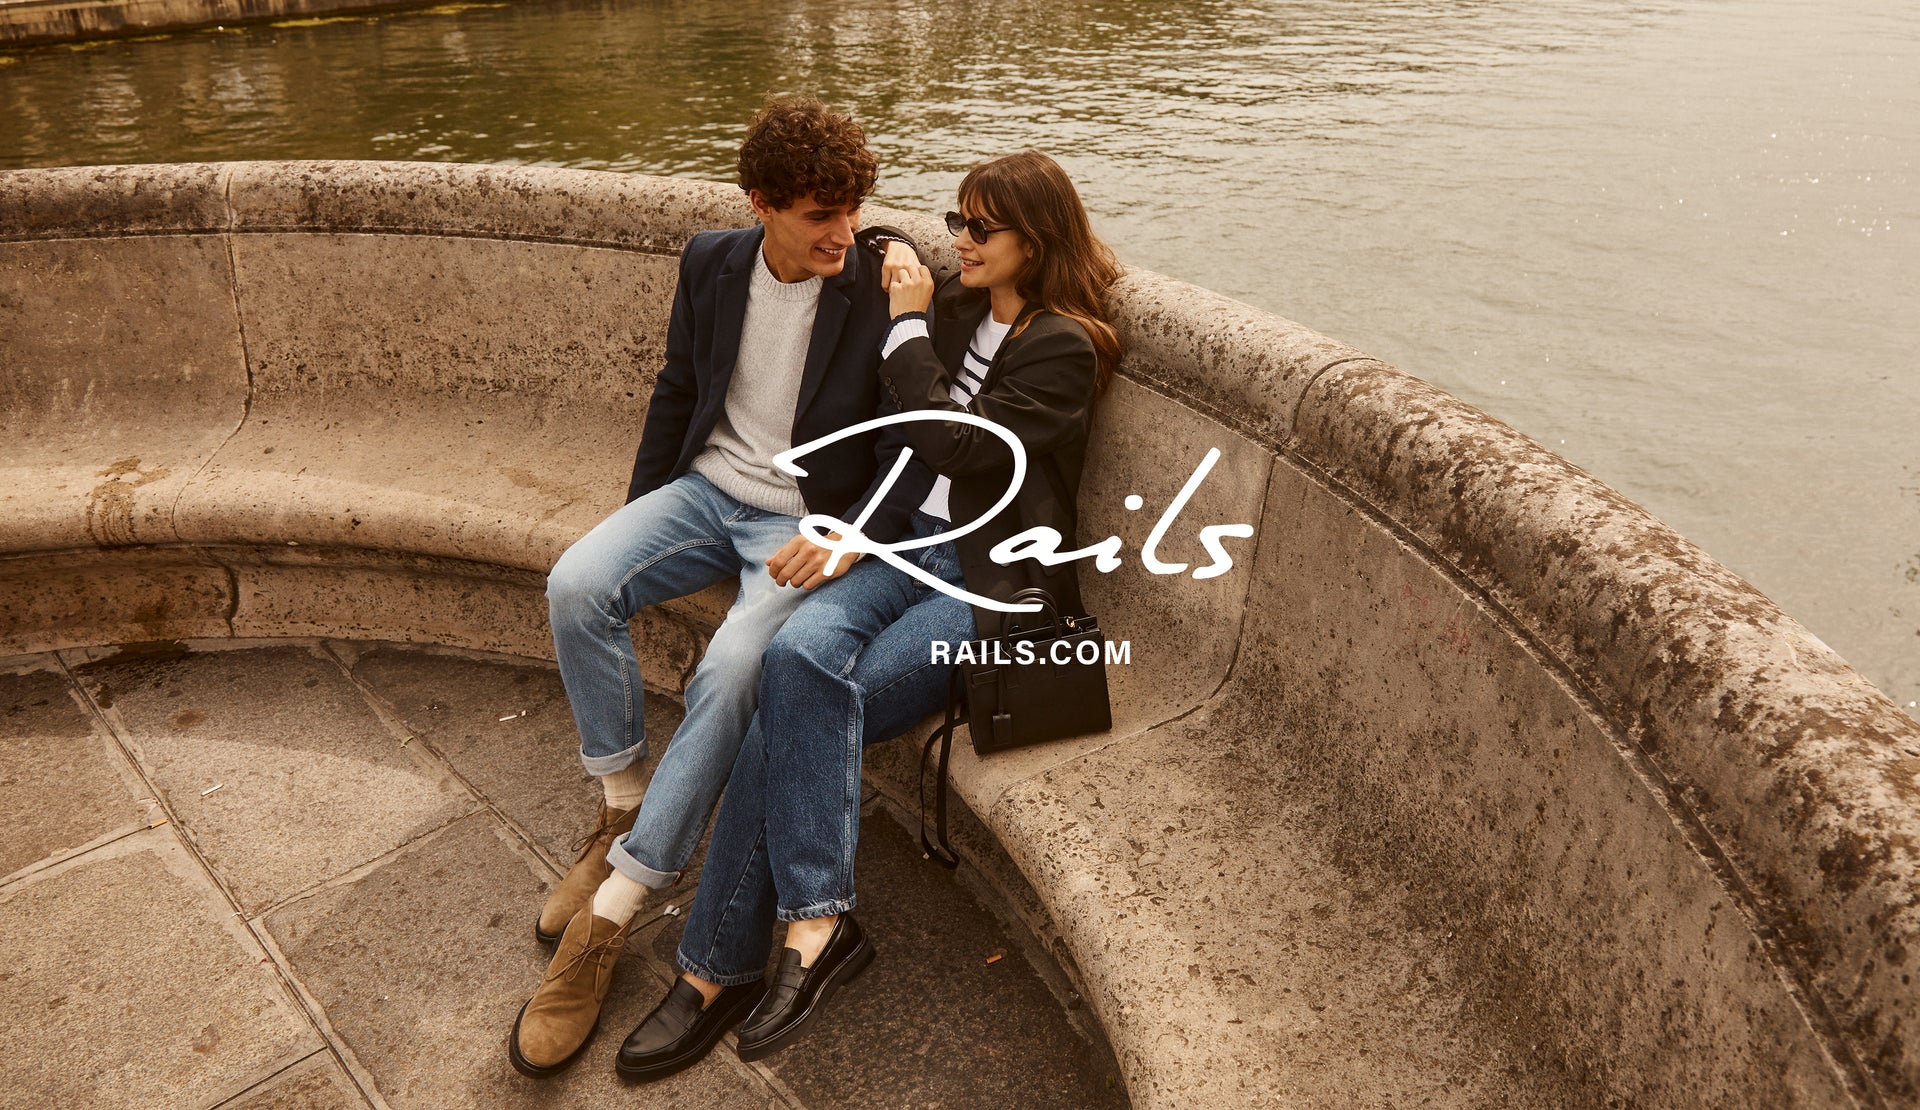 EDITORIAL IMAGE OF TWO MODELS SITTING OUTSIDE. FRIST MODEL IS WEARING LARK COAT, DONOVAN SWEATER, AND CLAYTON SLIM STRAIGHT JEANS. SECOND MODEL IS WEARING JAC BLAZER, GEMMA SWEATER, AND TOPANGA STRAIGHT JEANS. 